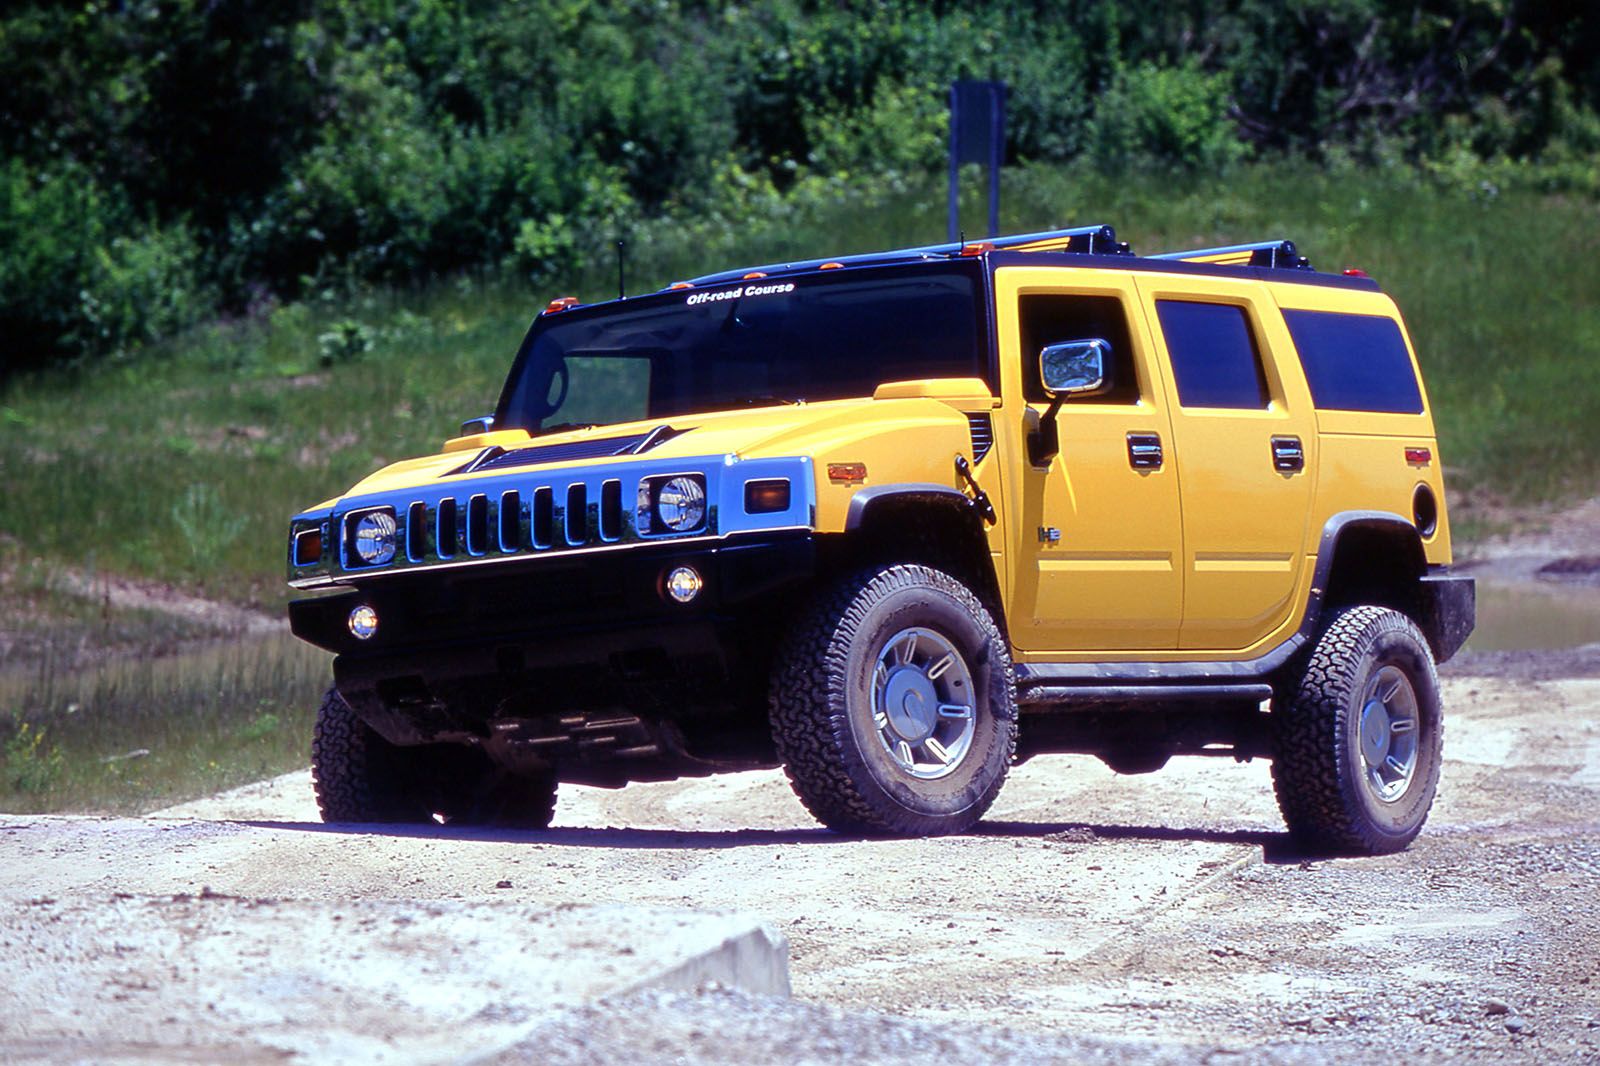 Bright Yellow Hummer H2 off-road outdoors forest